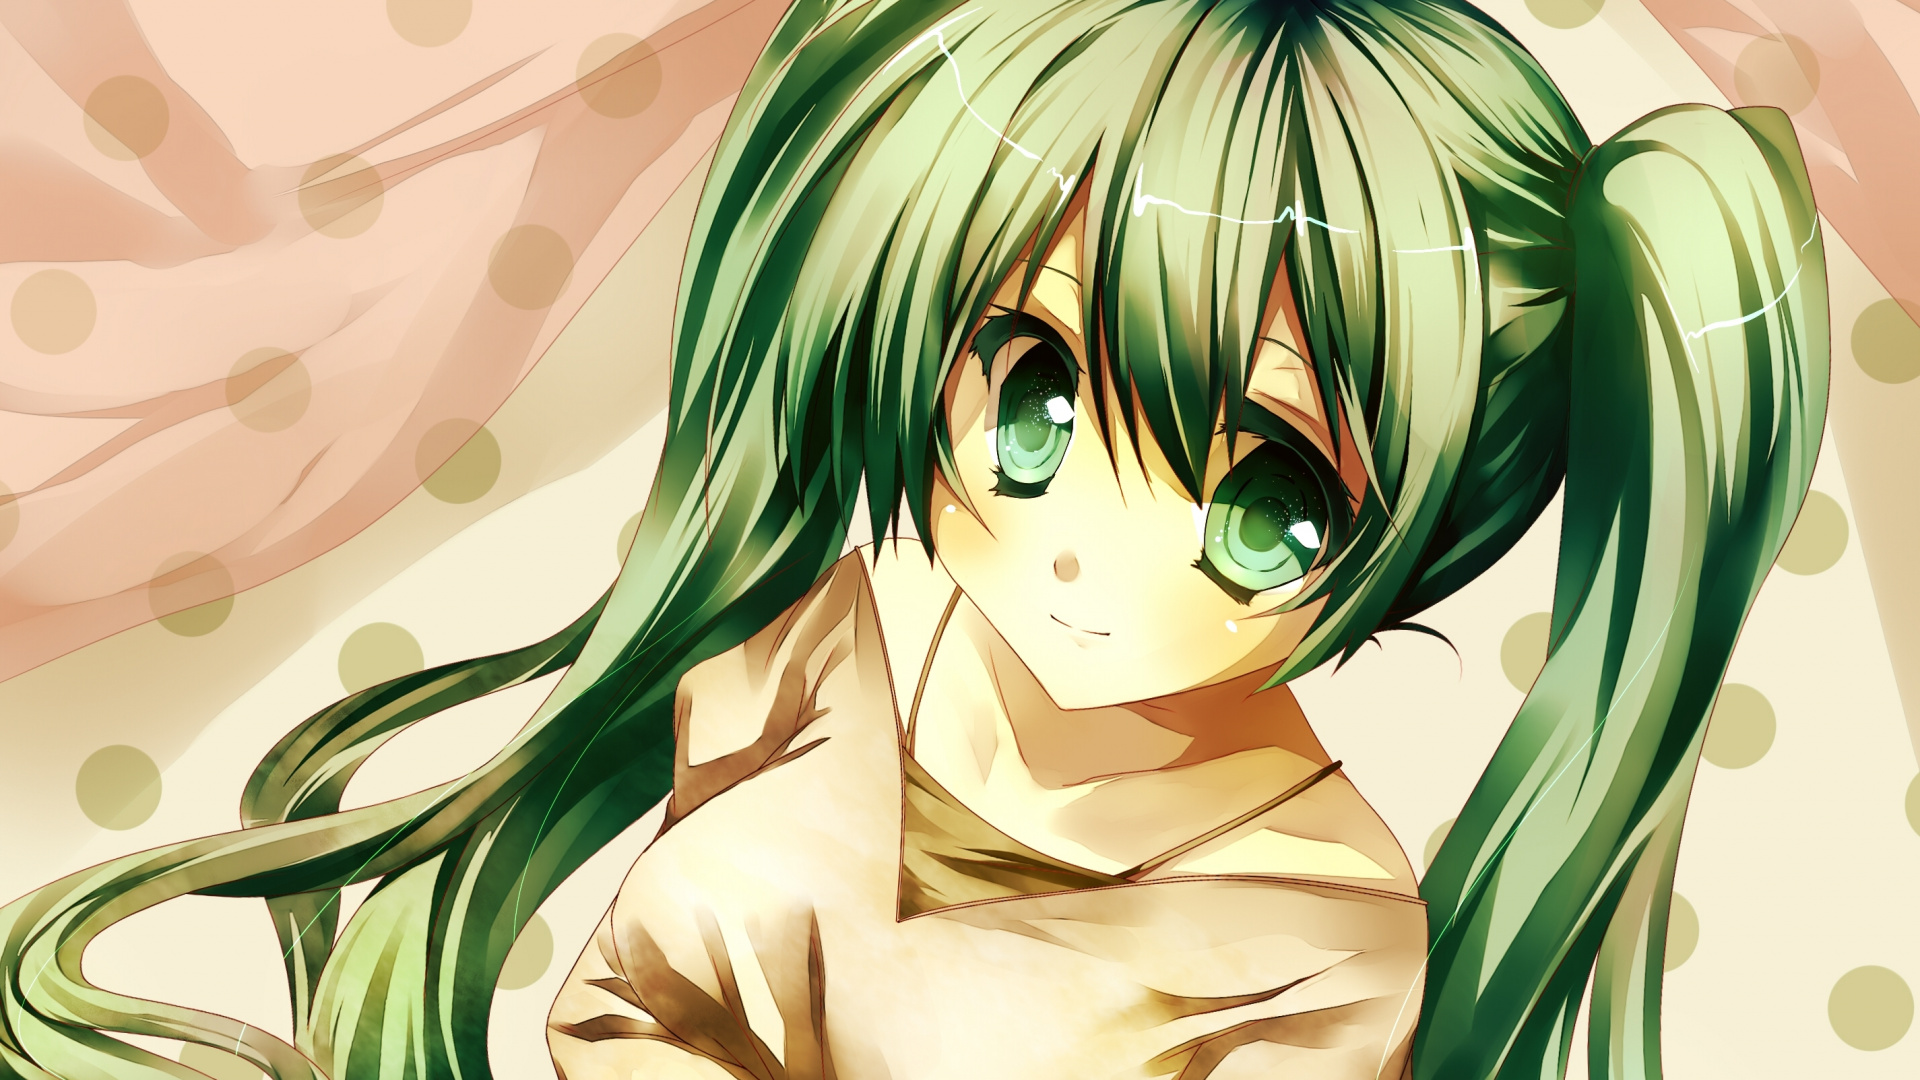 Green Haired Male Anime Character. Wallpaper in 1920x1080 Resolution